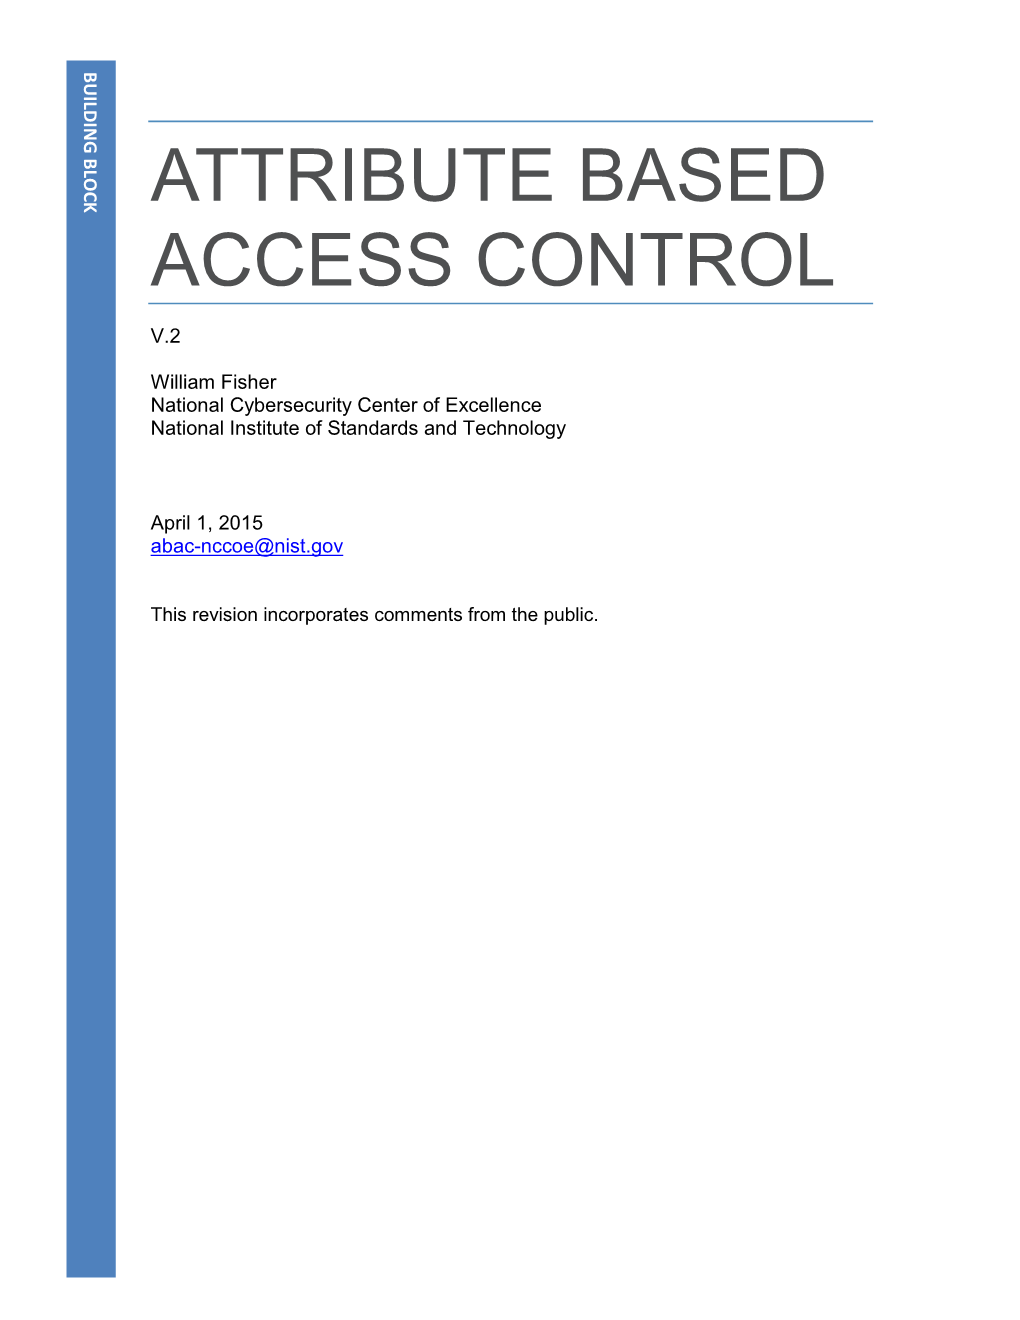 Attribute Based Access Control